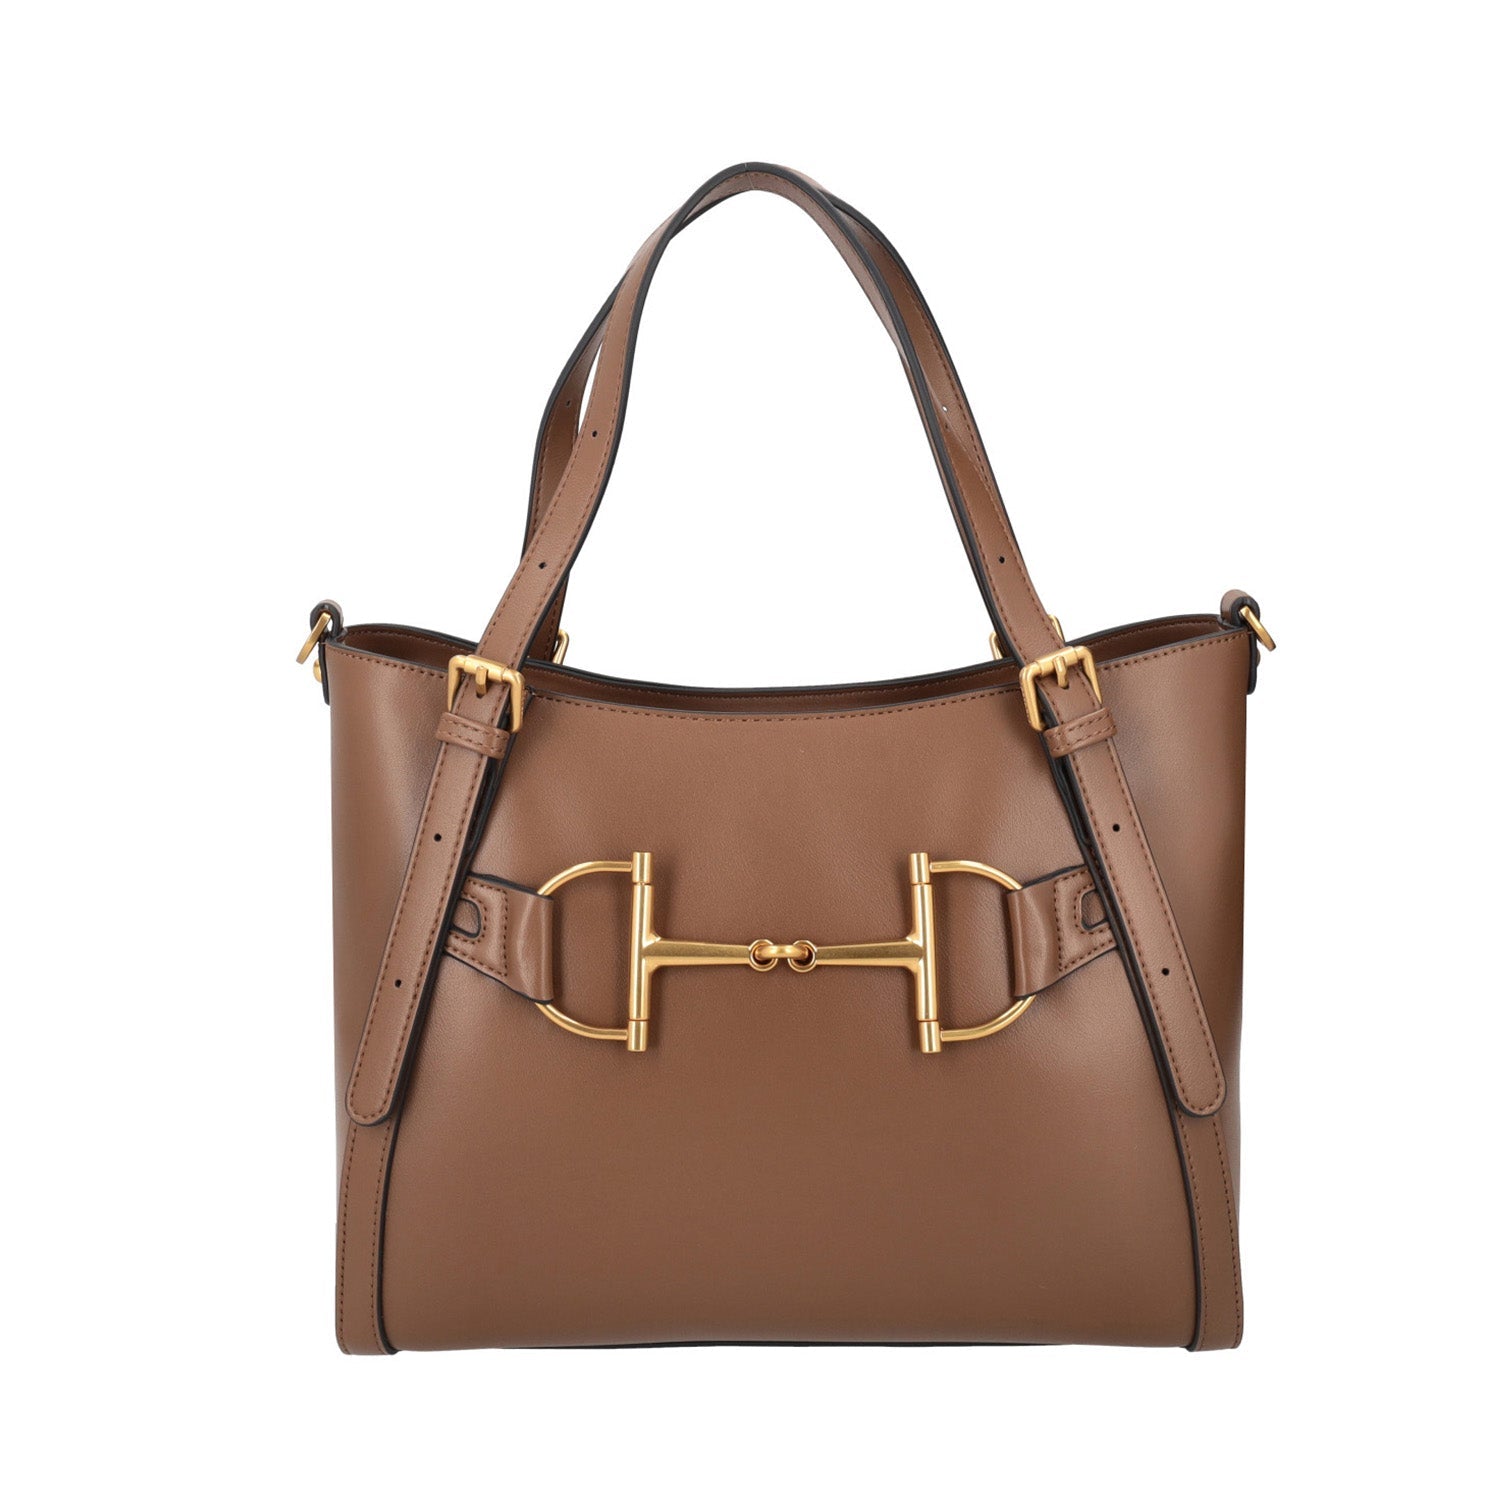 BROWN TAYLOR SHOPPING BAG WITH CLAMP ACCESSORY